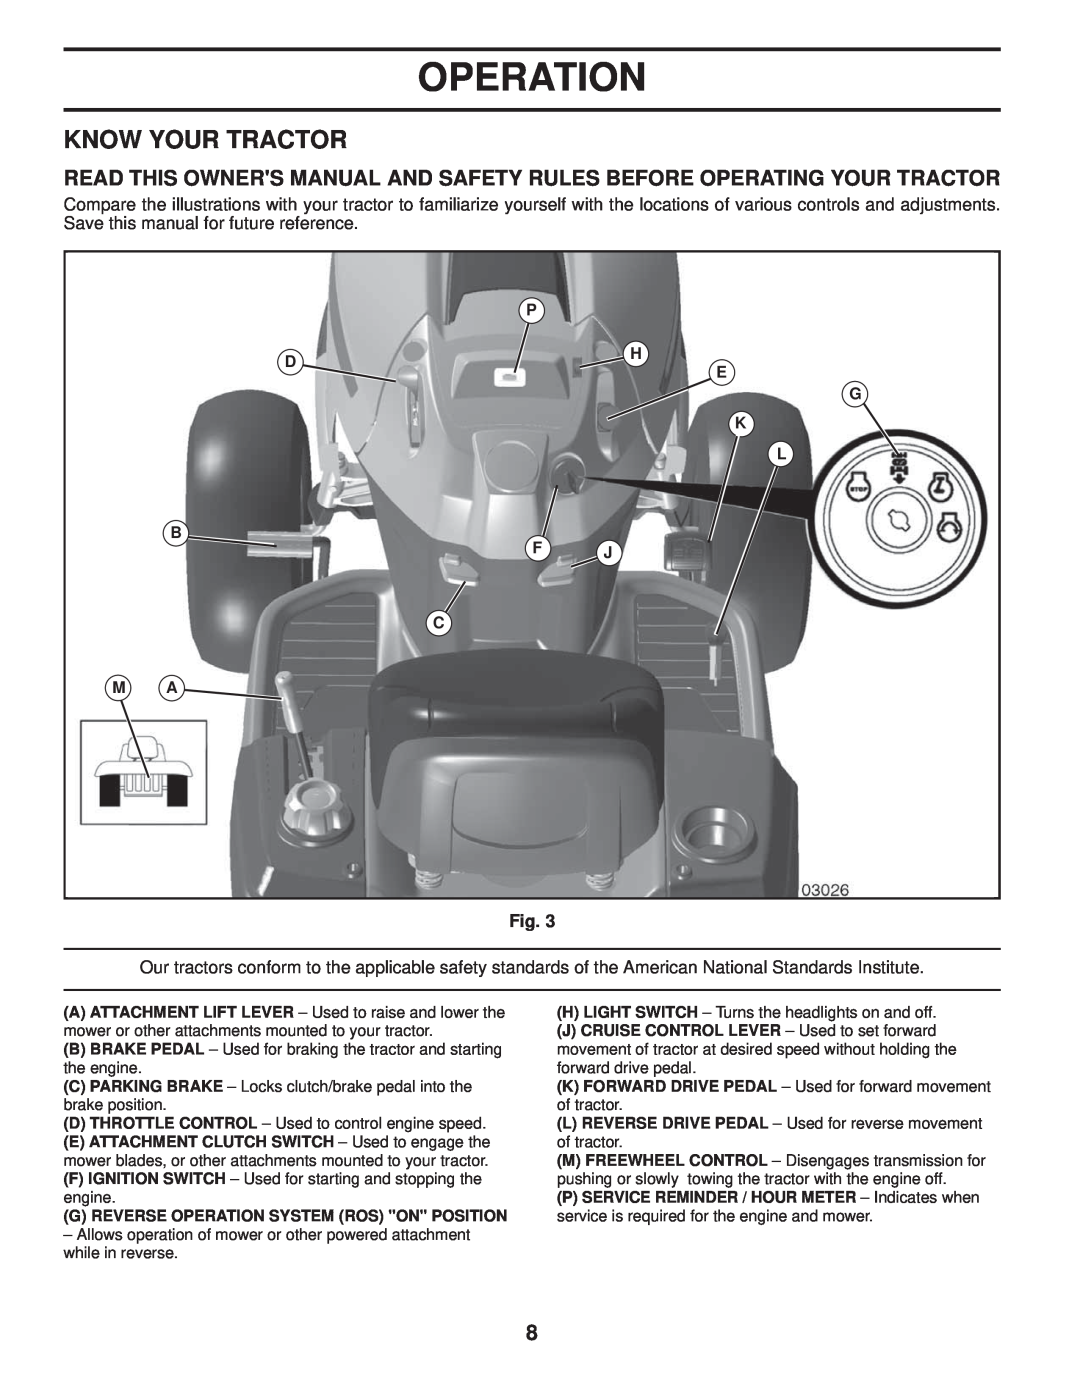 Husqvarna 96045001900 owner manual Know Your Tractor, P Dh E, G K L F J, G Reverse Operation System Ros On Position 